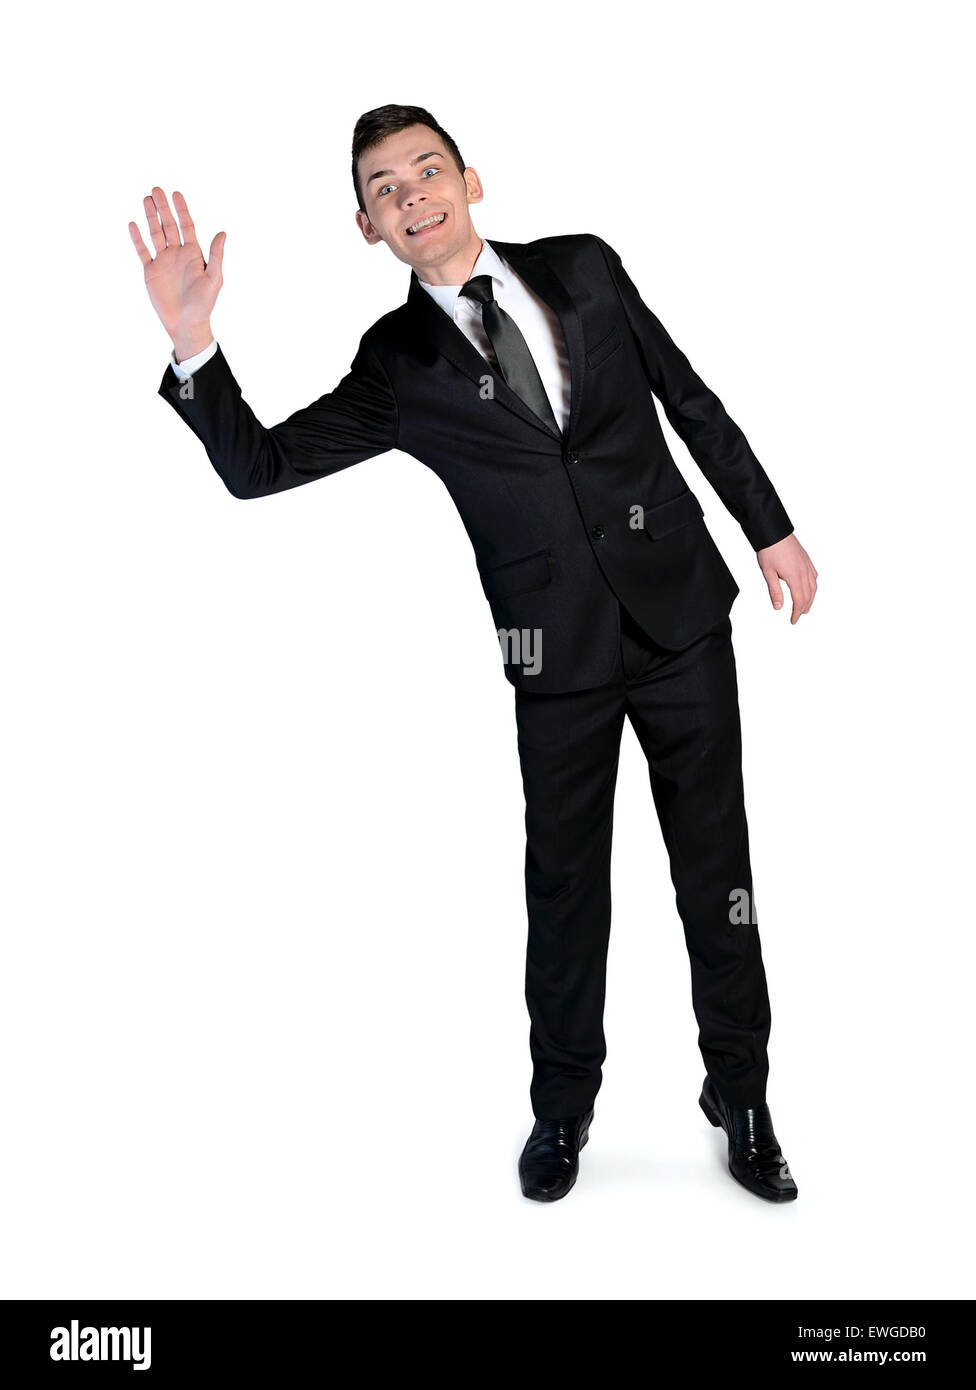 Business man wave hand welcome Stock Photo